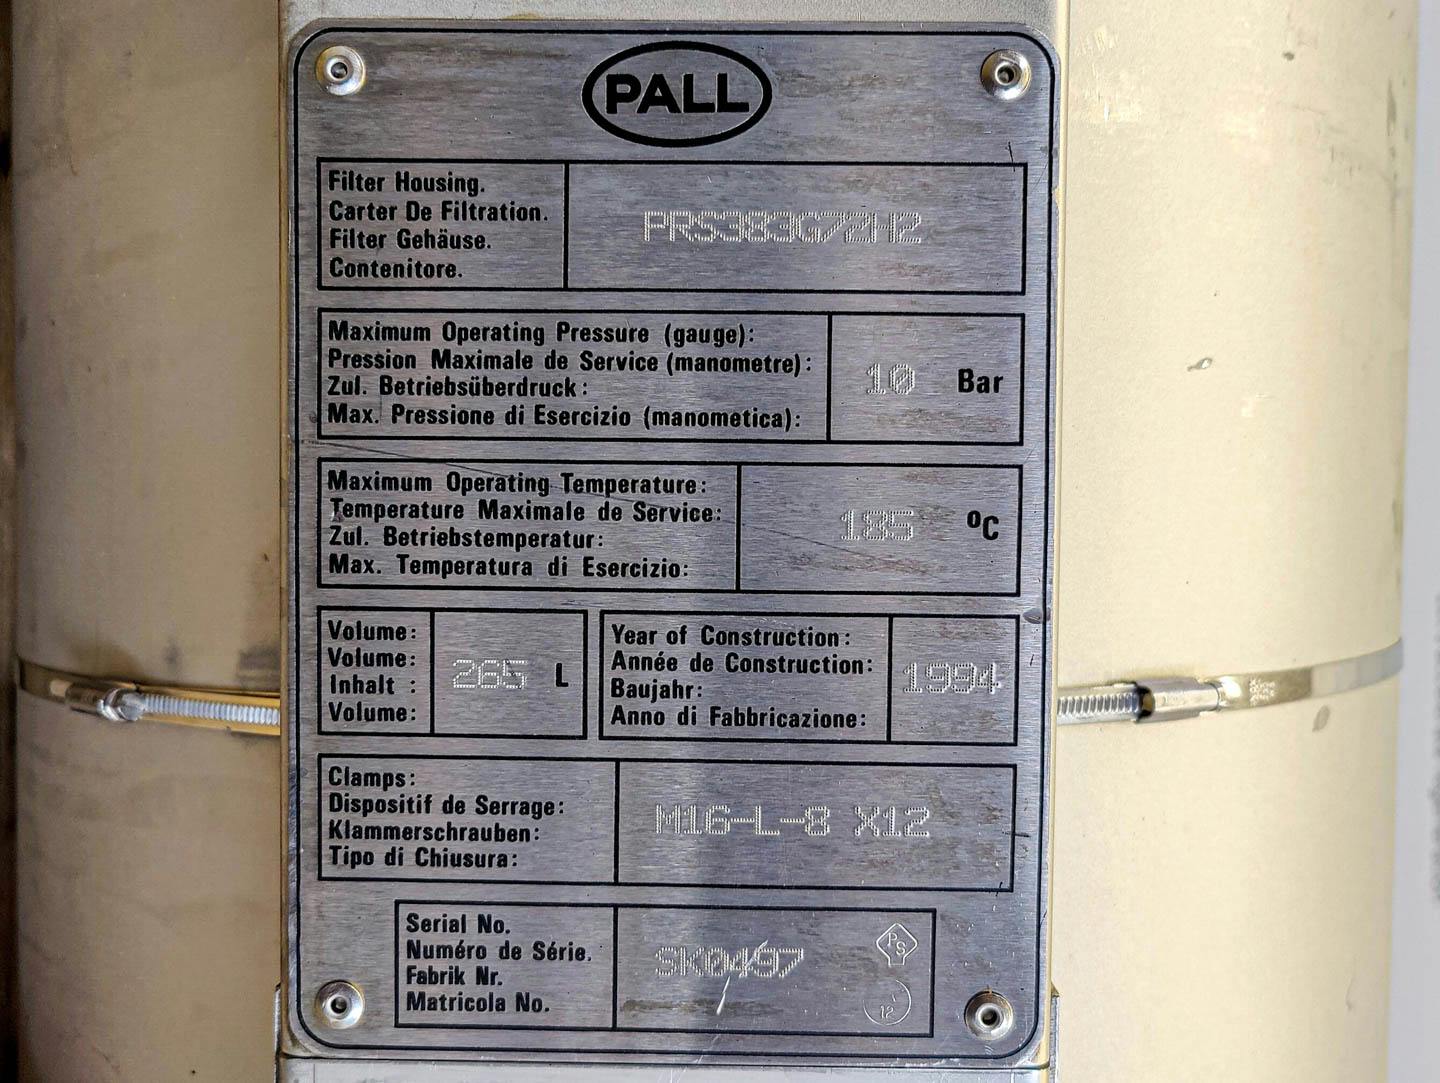 Pall PRS383G72H2 - Filtr workowy - image 15